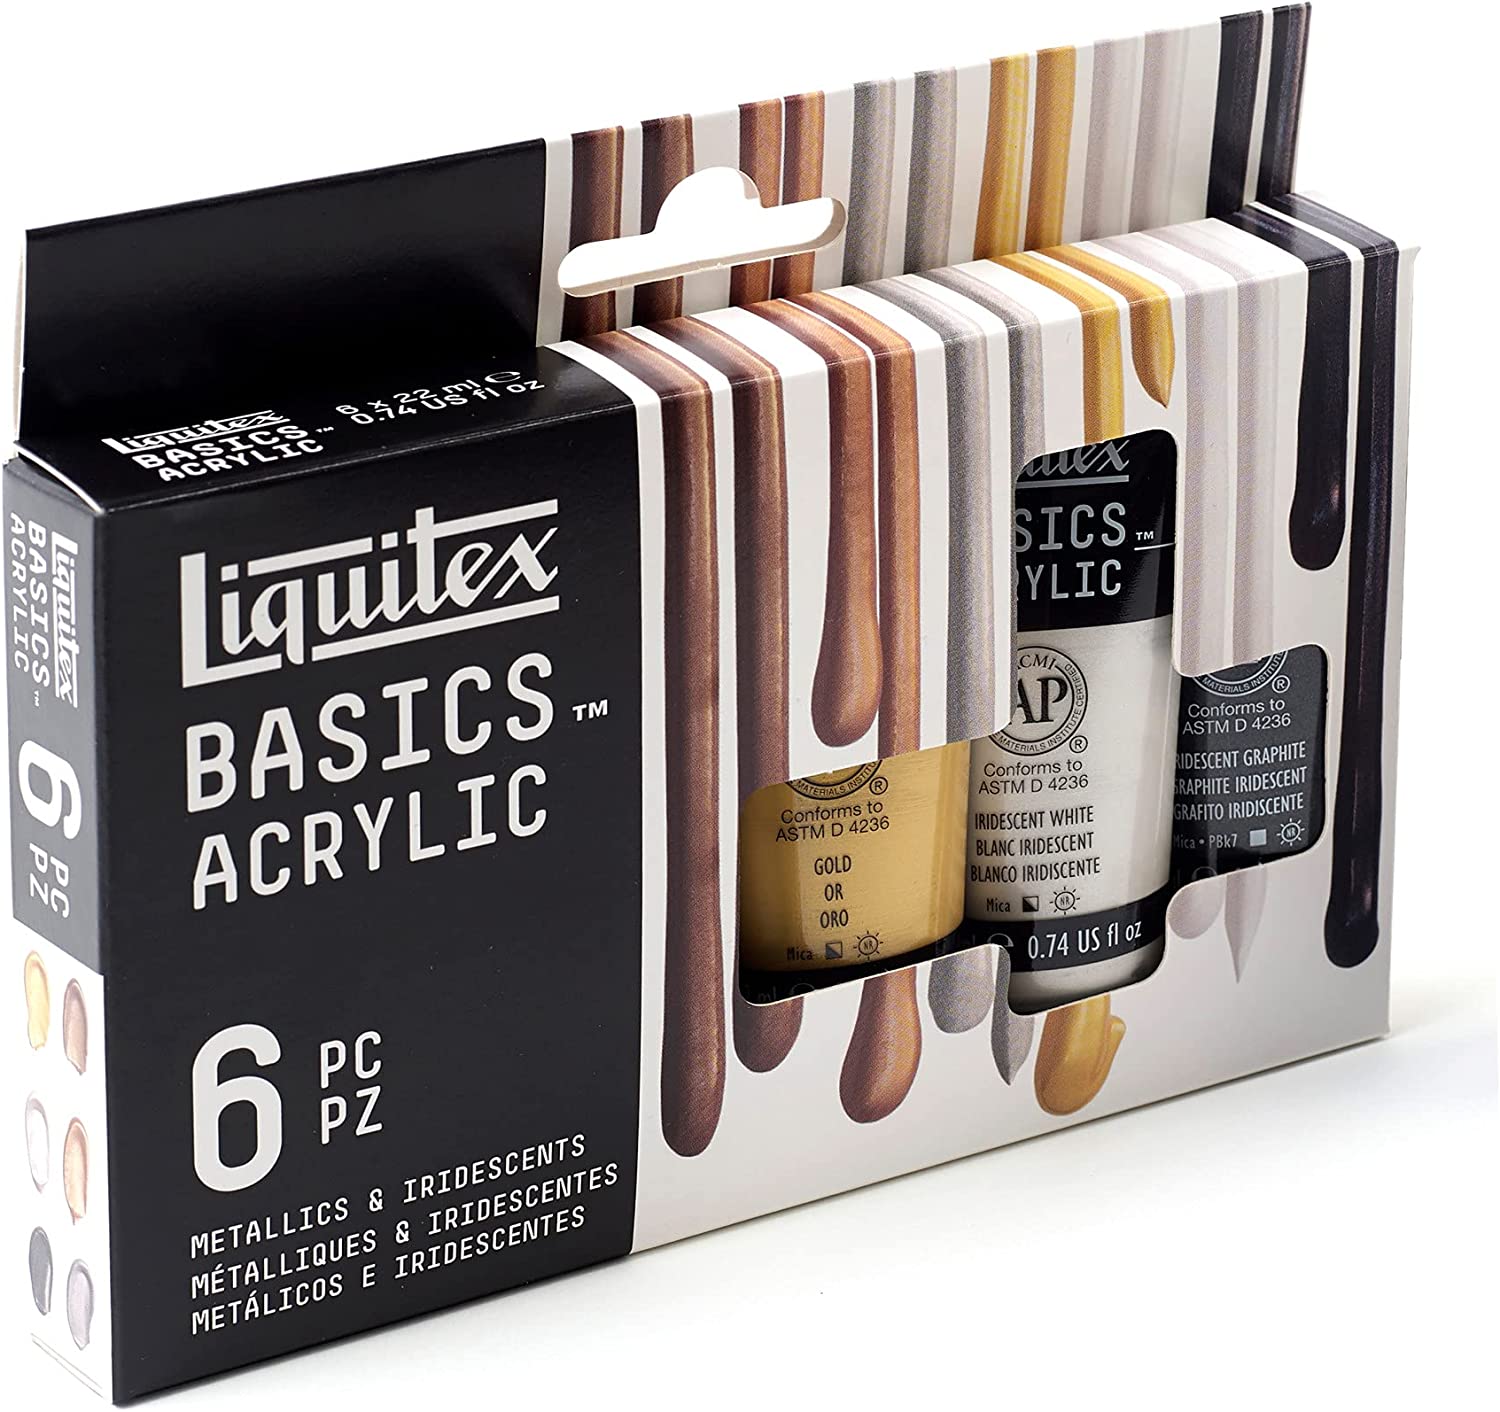 Liquitex  The home of acrylic paint since 1955